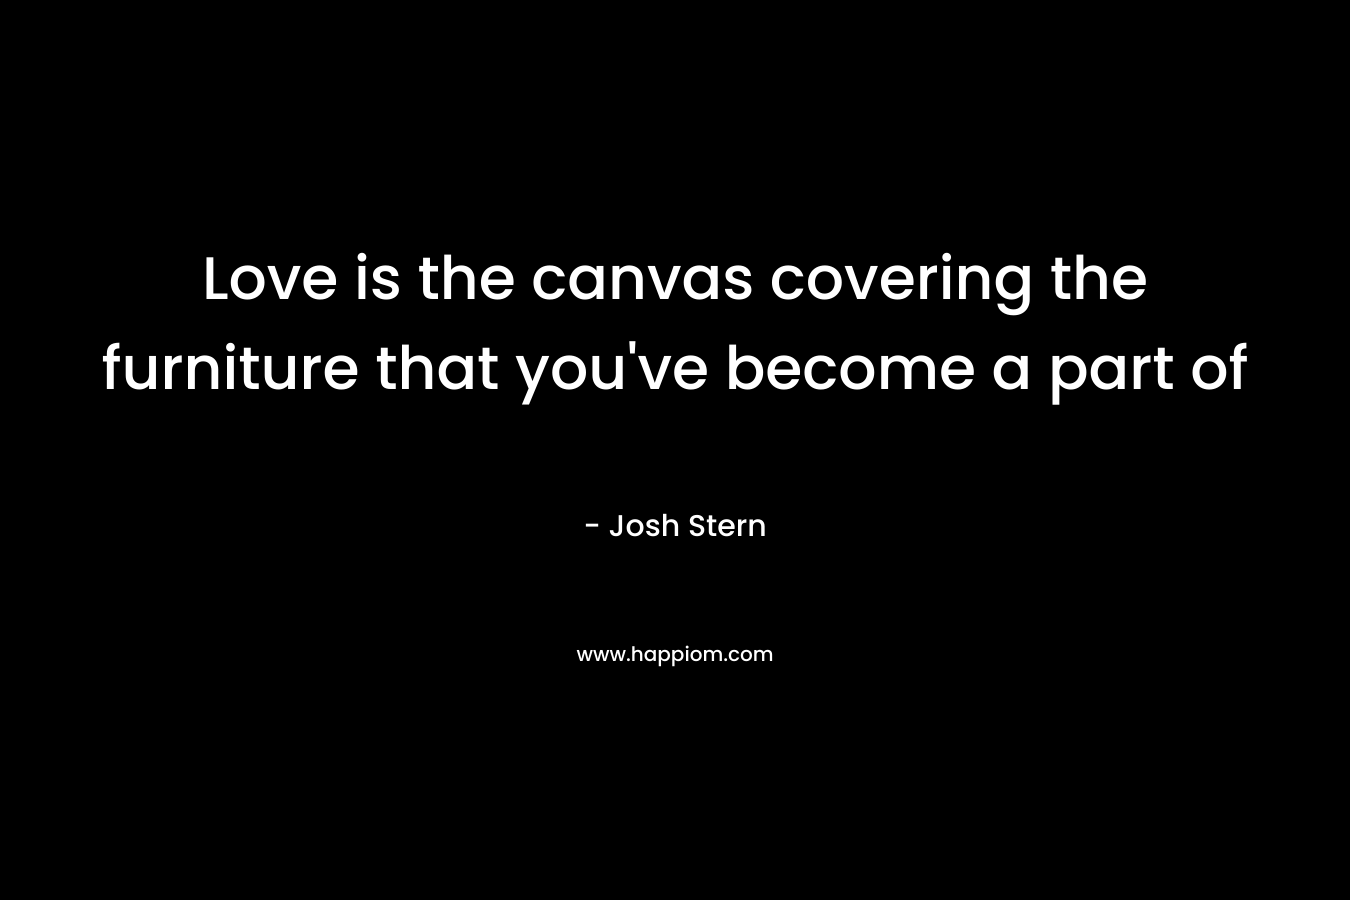 Love is the canvas covering the furniture that you’ve become a part of – Josh Stern